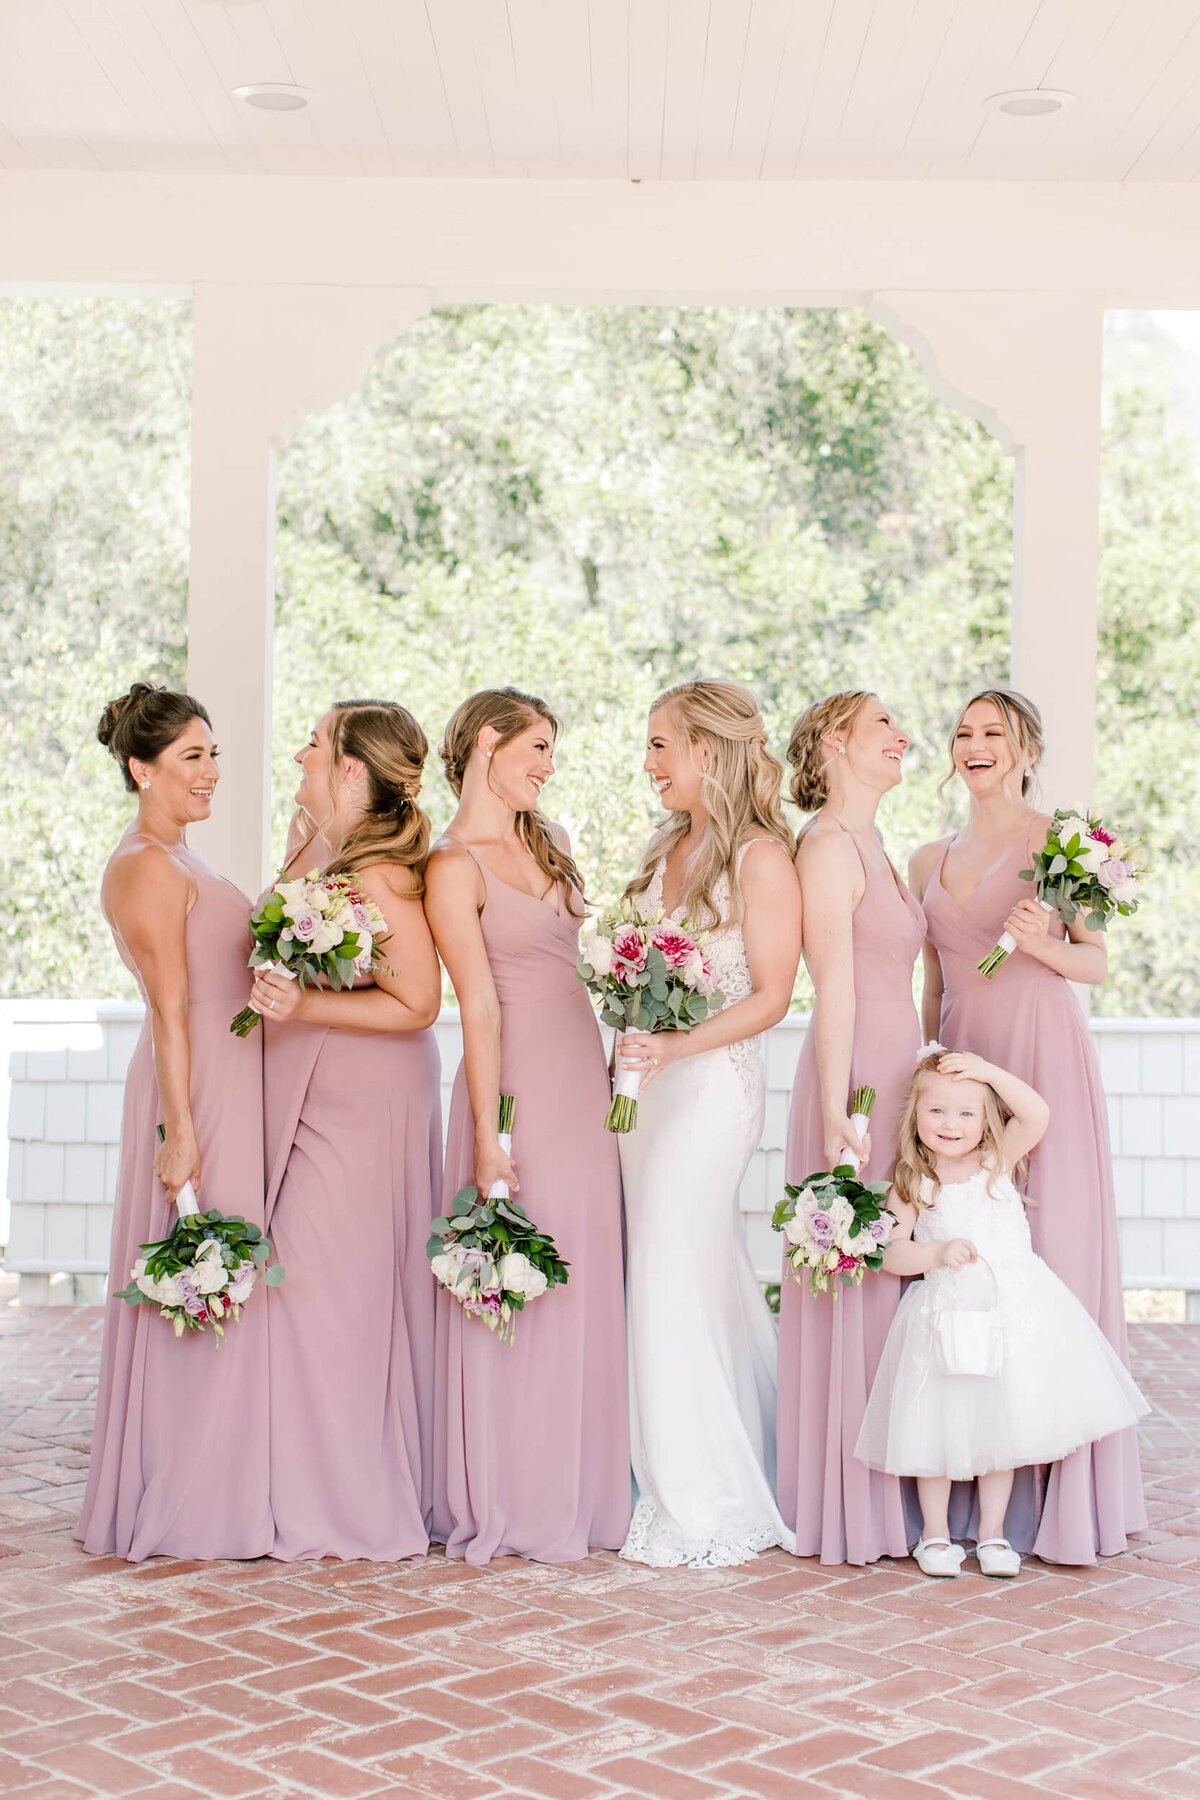 Bride with bridesmaids and flower girl